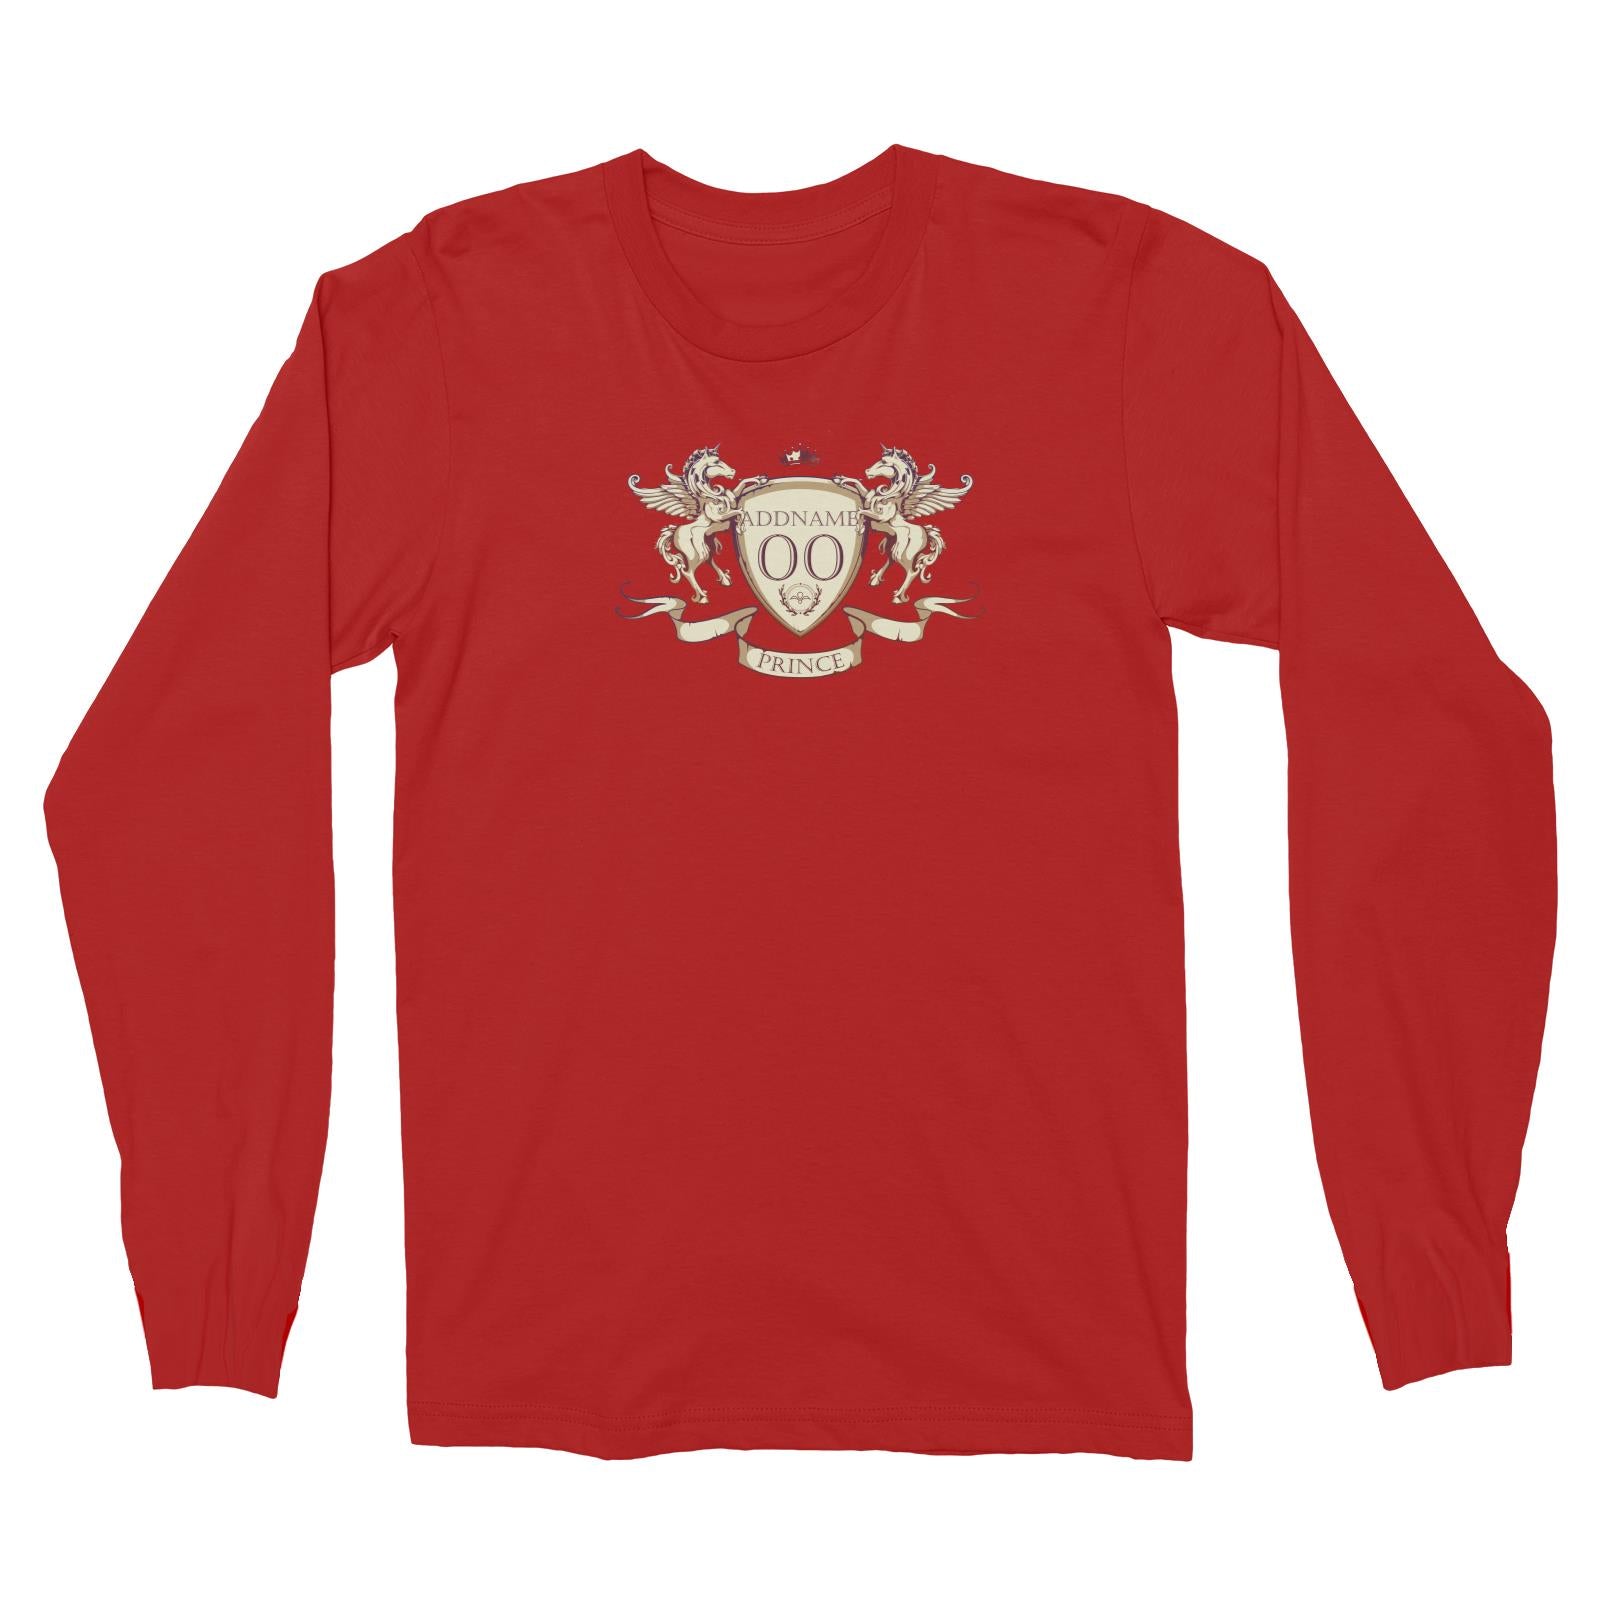 Horse Royal Emblem Prince Personalizable with Name and Number Long Sleeve Unisex T-Shirt